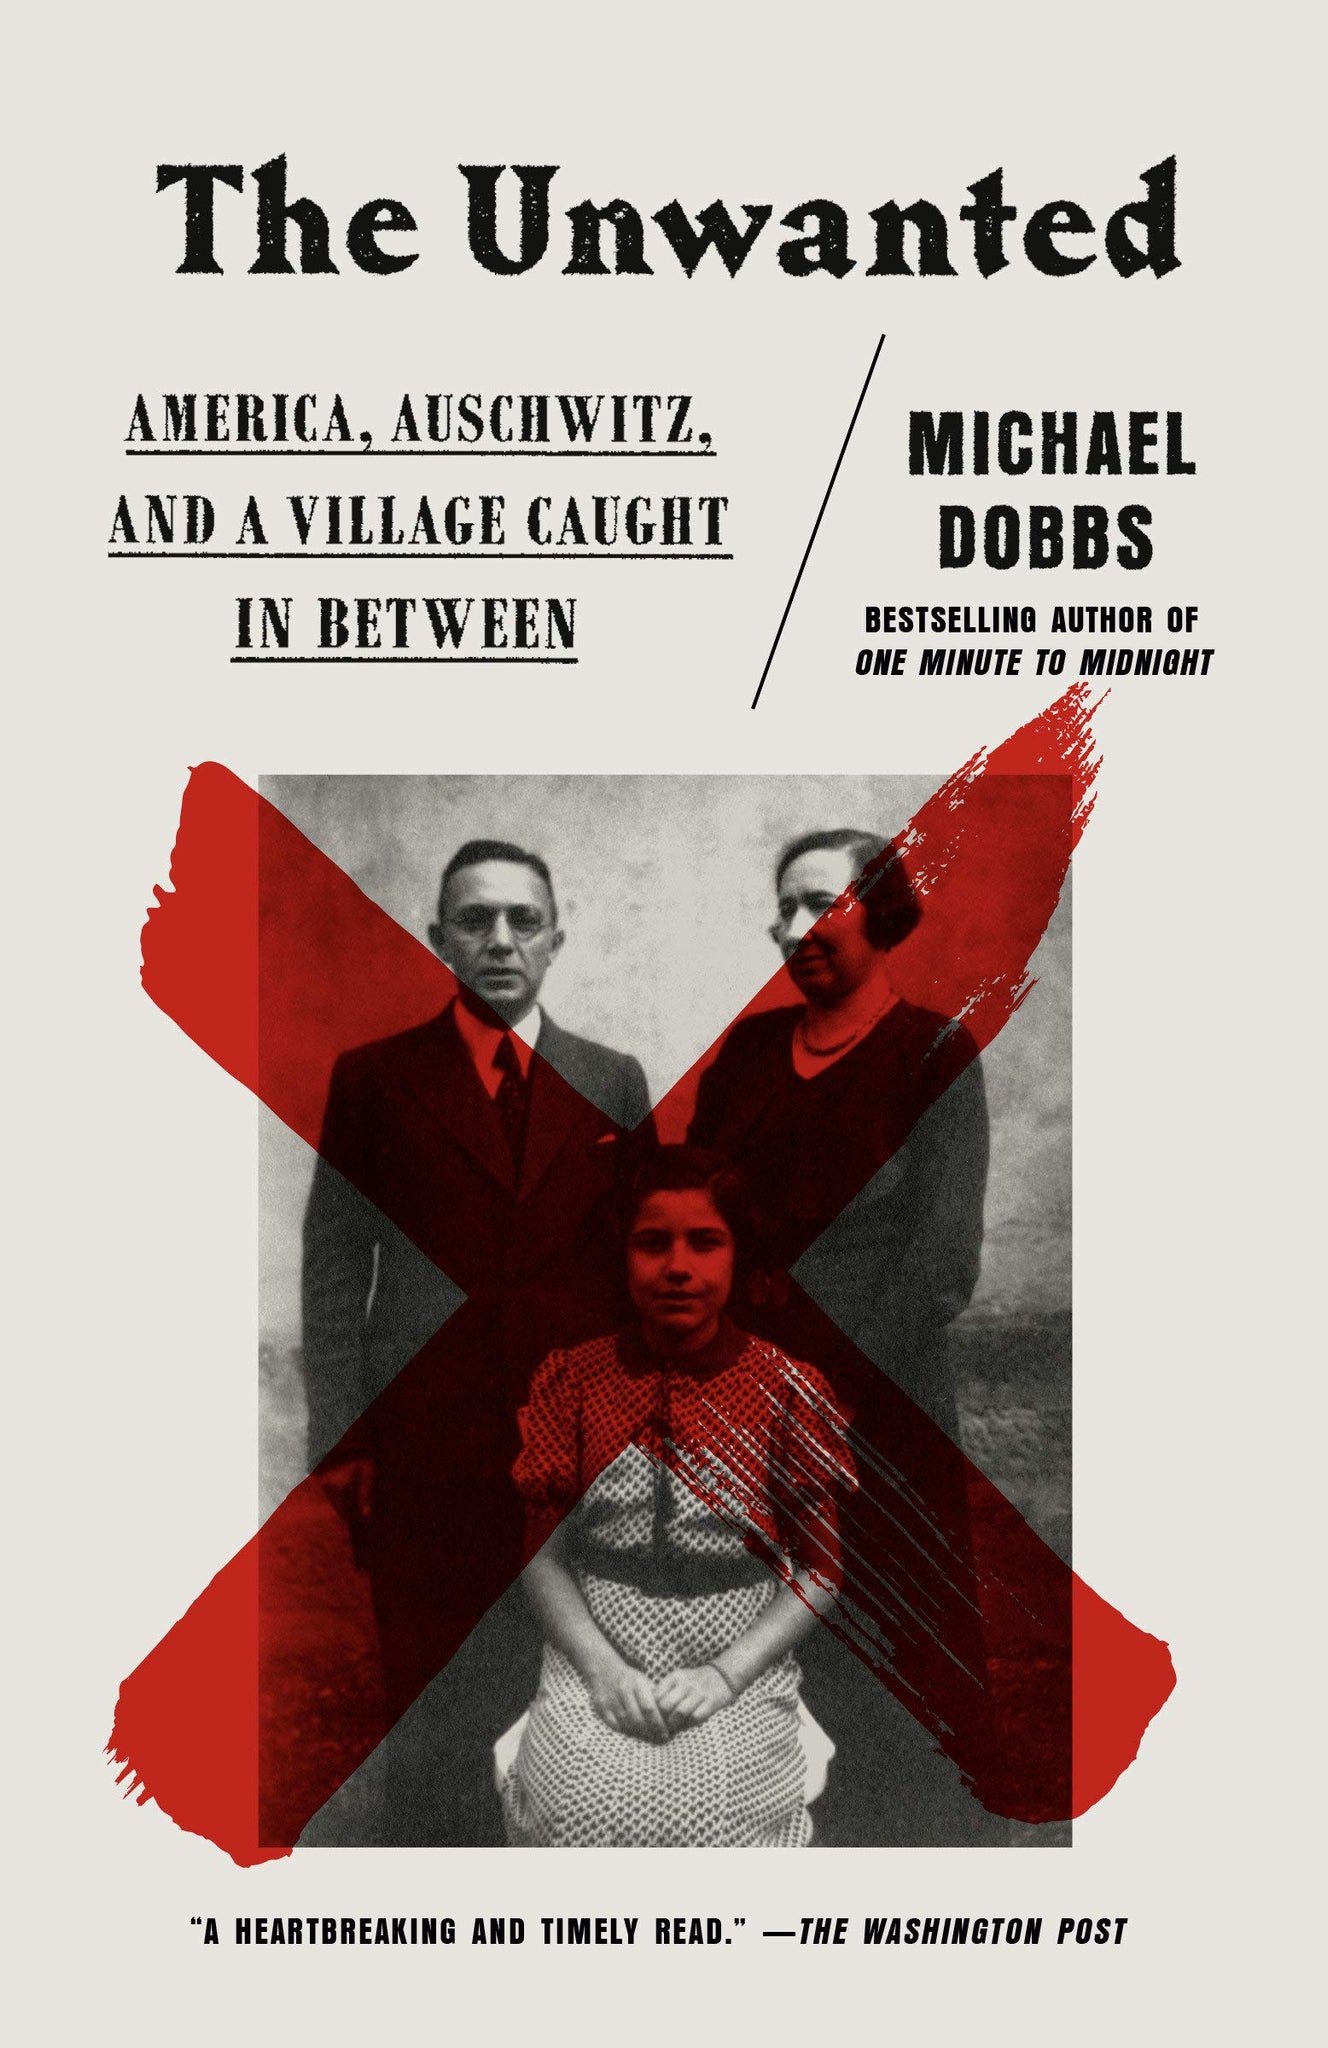 The Unwanted: America, Auschwitz, and a Village Caught in Between